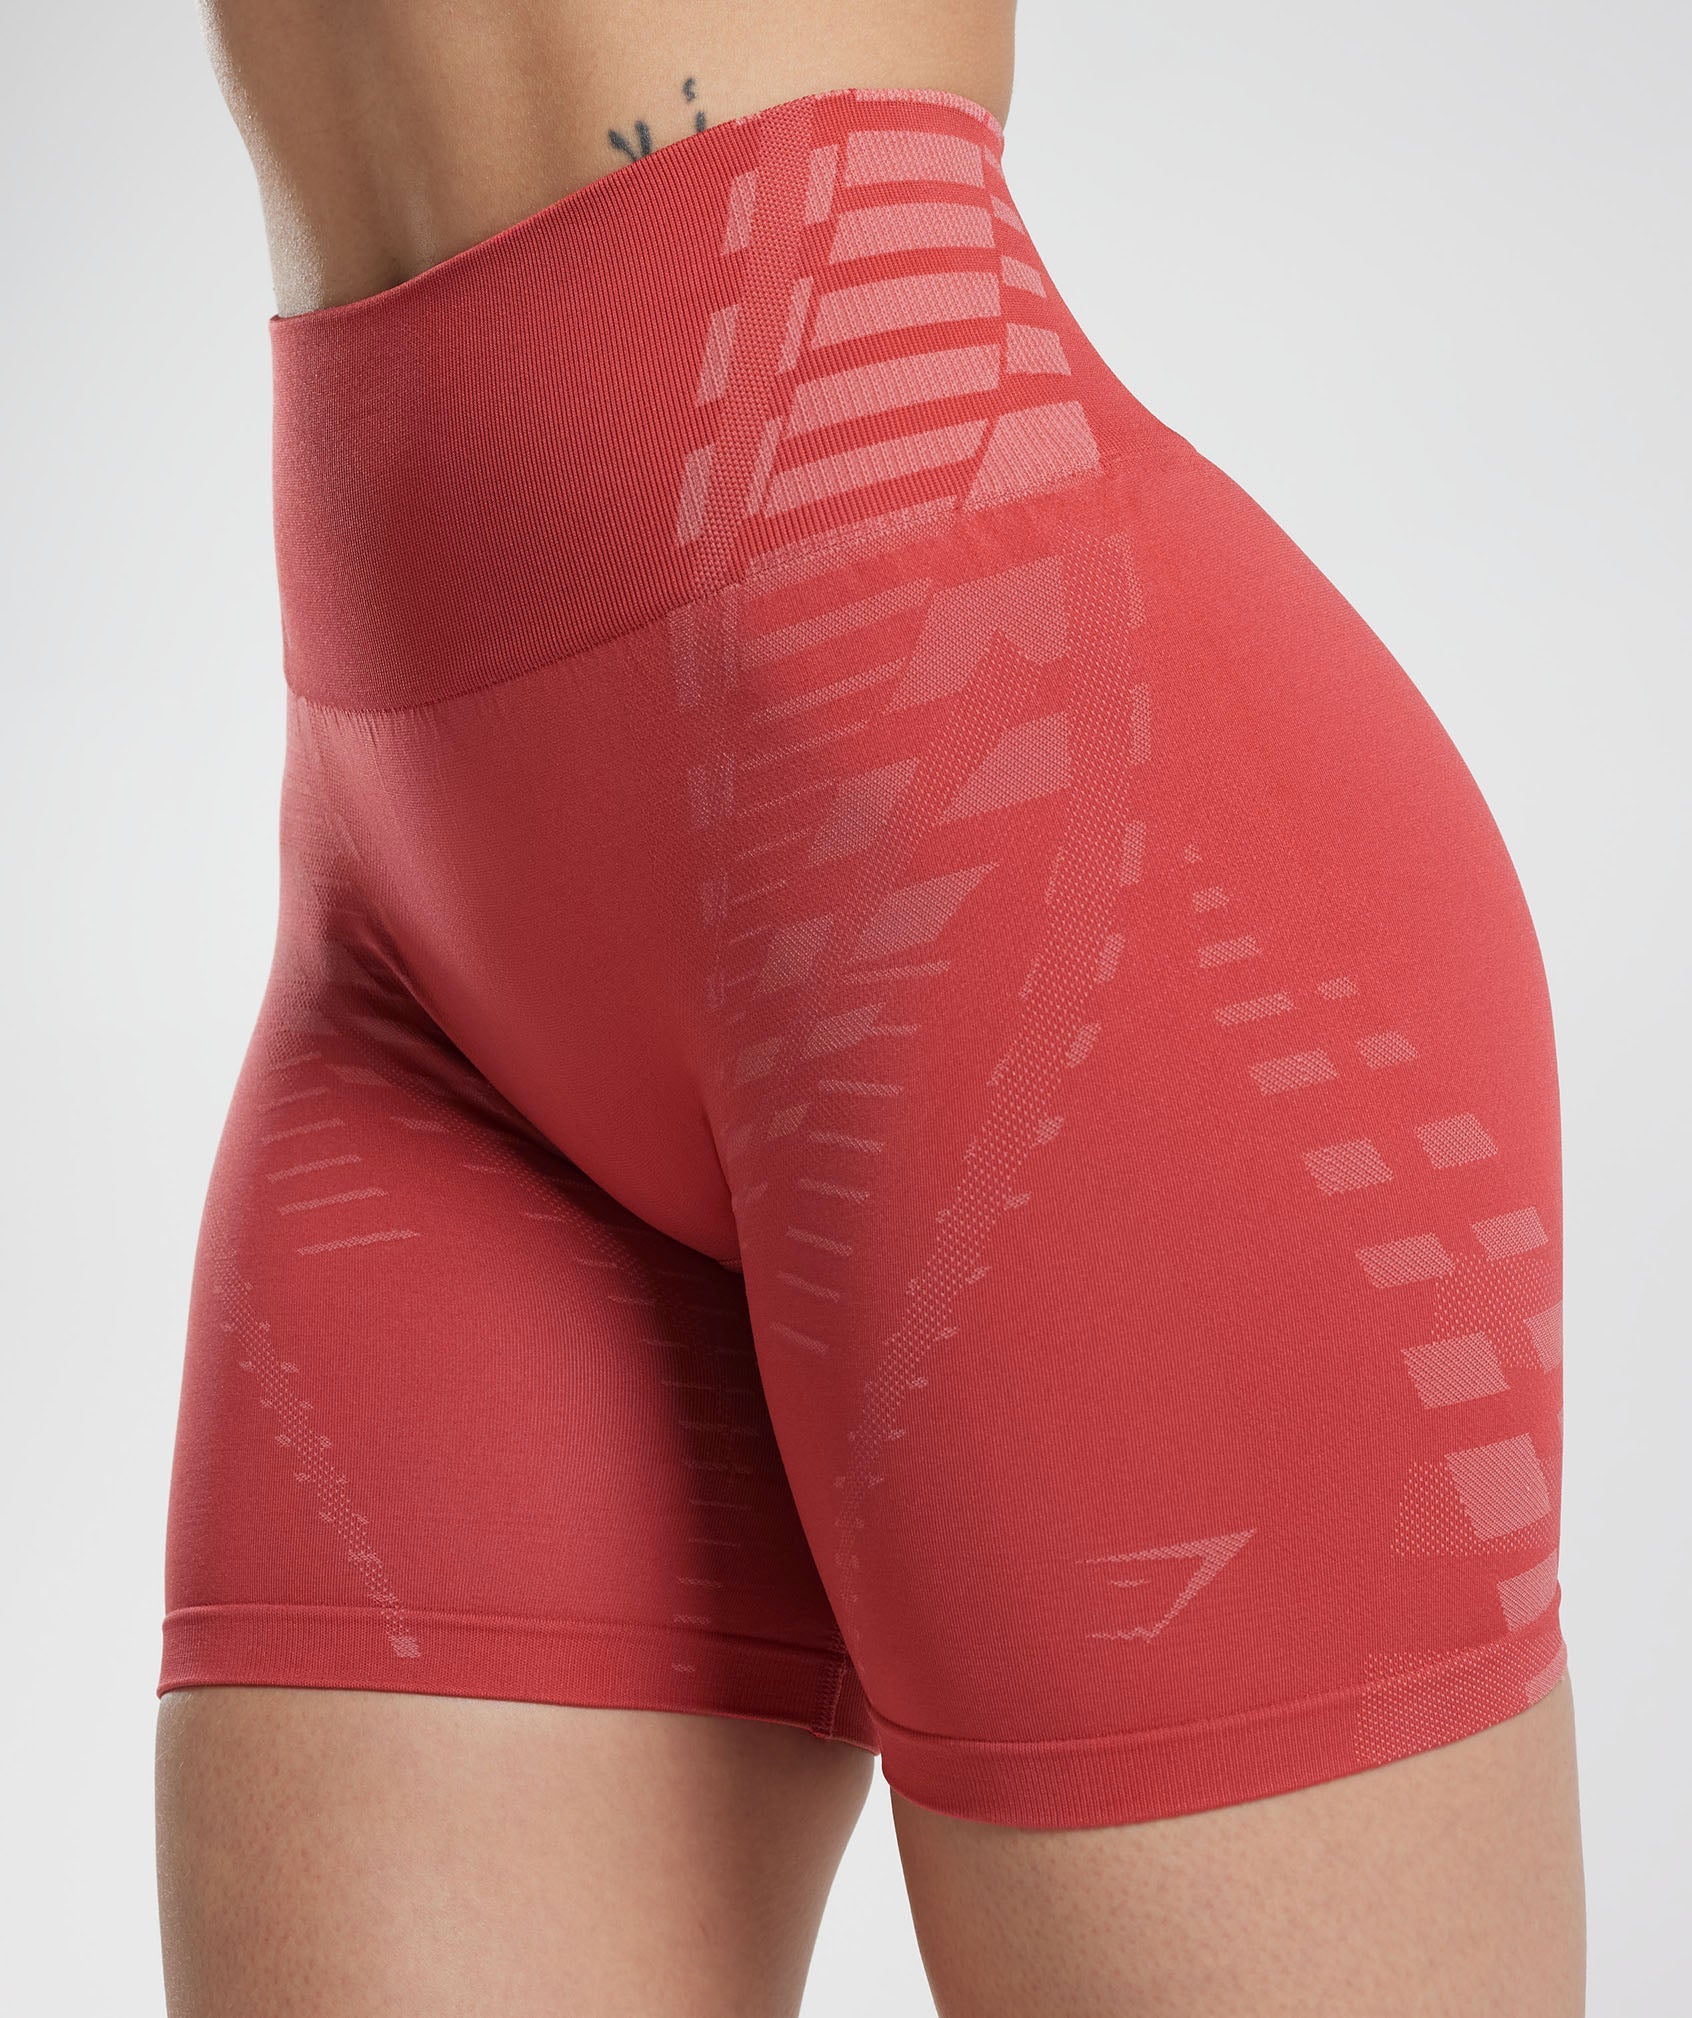 Apex Limit Shorts in Sundried Red/Terracotta Pink